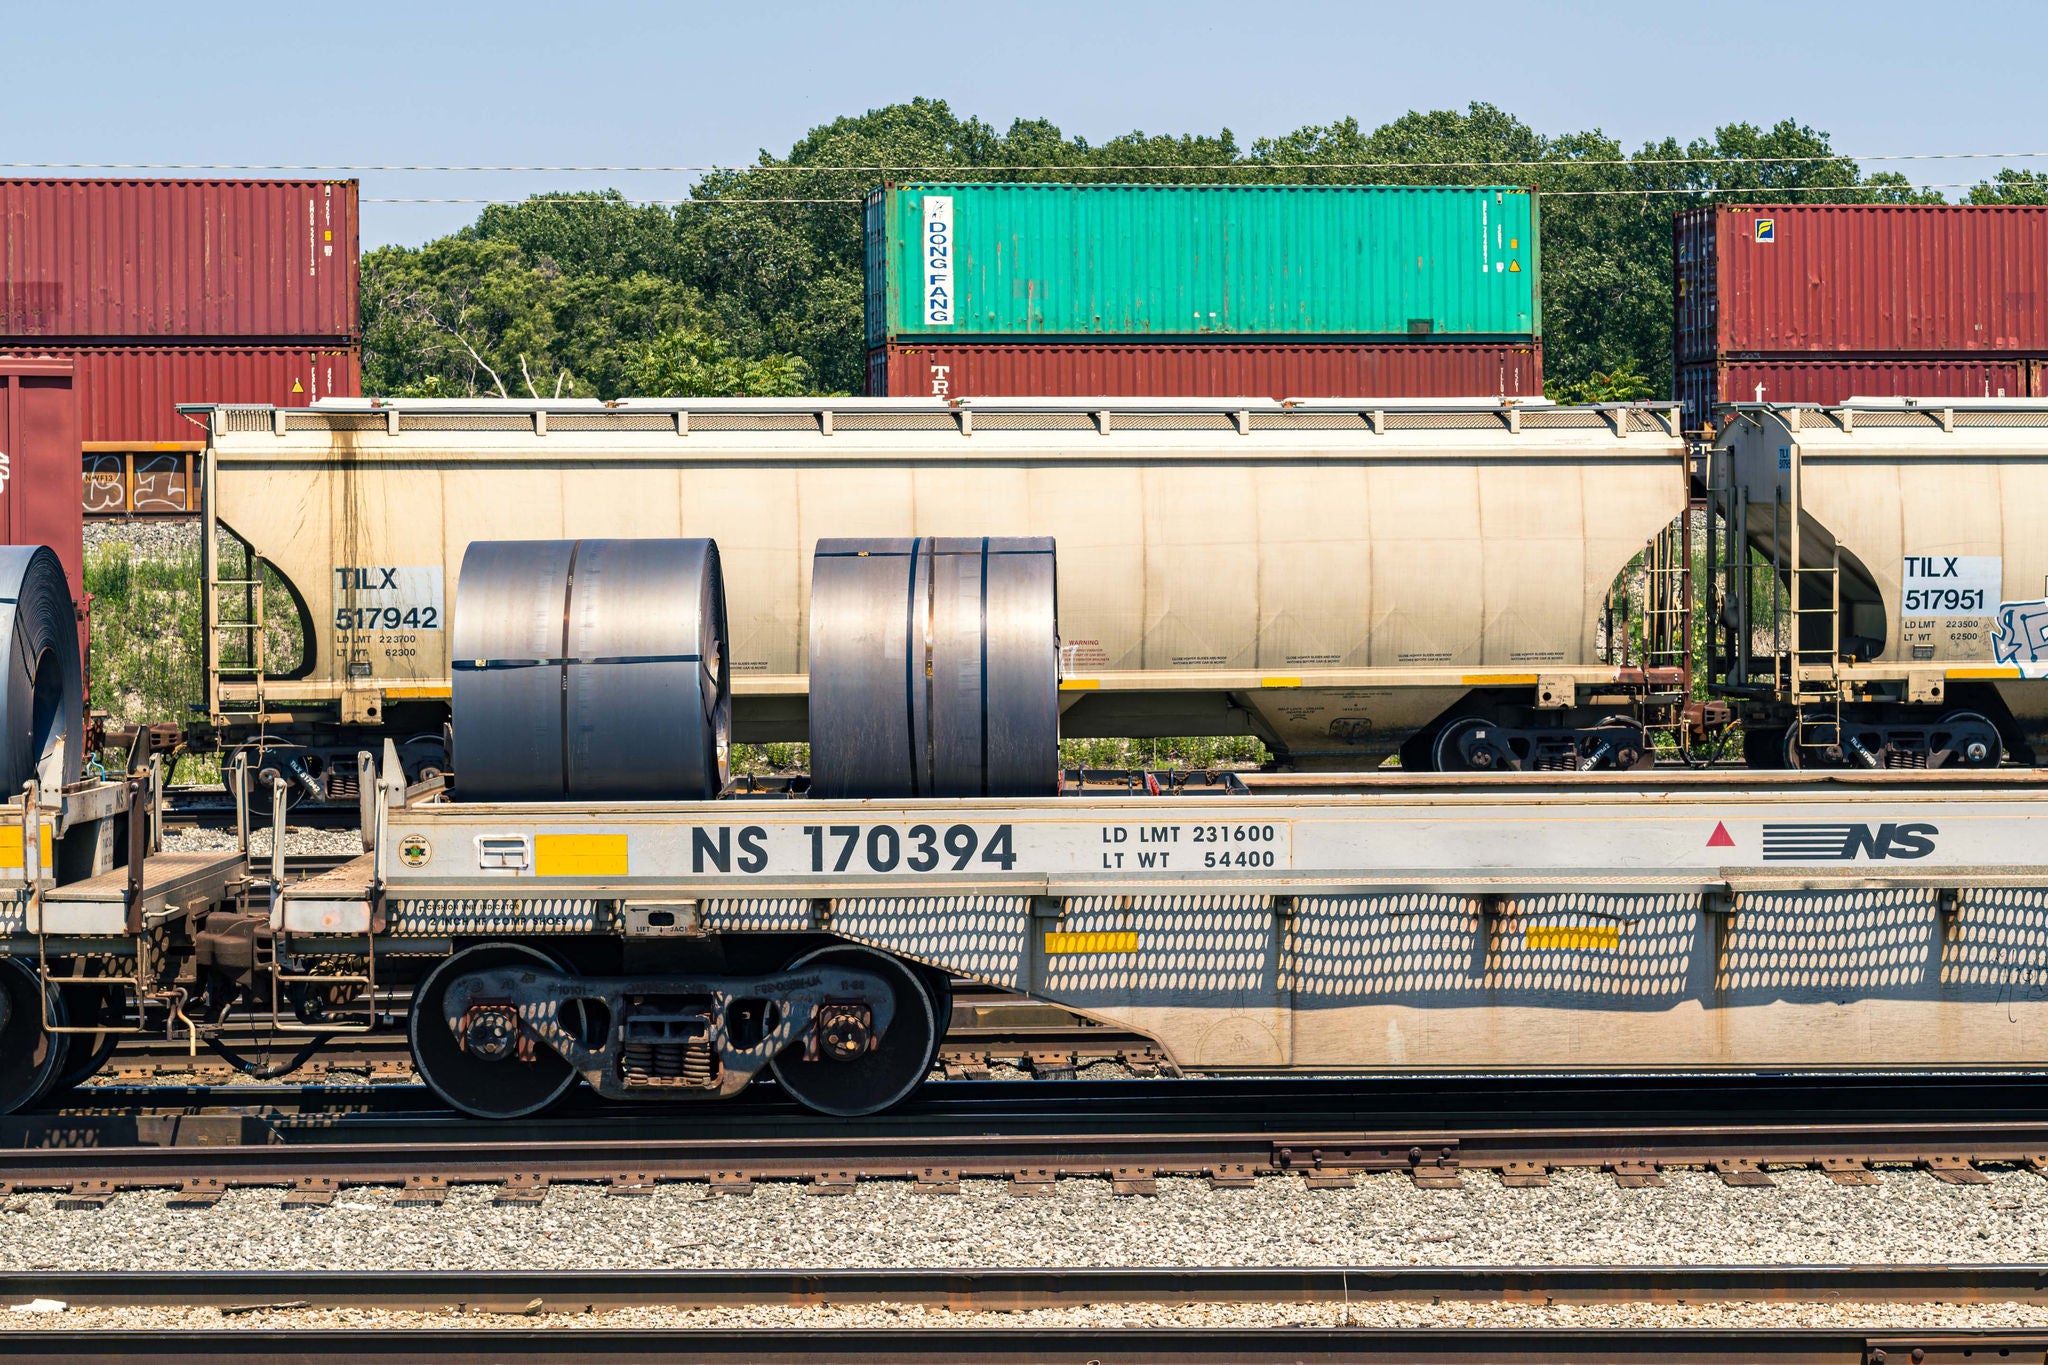 Norfolk Southern railyard with many intermodal containers awaiting rail shipping